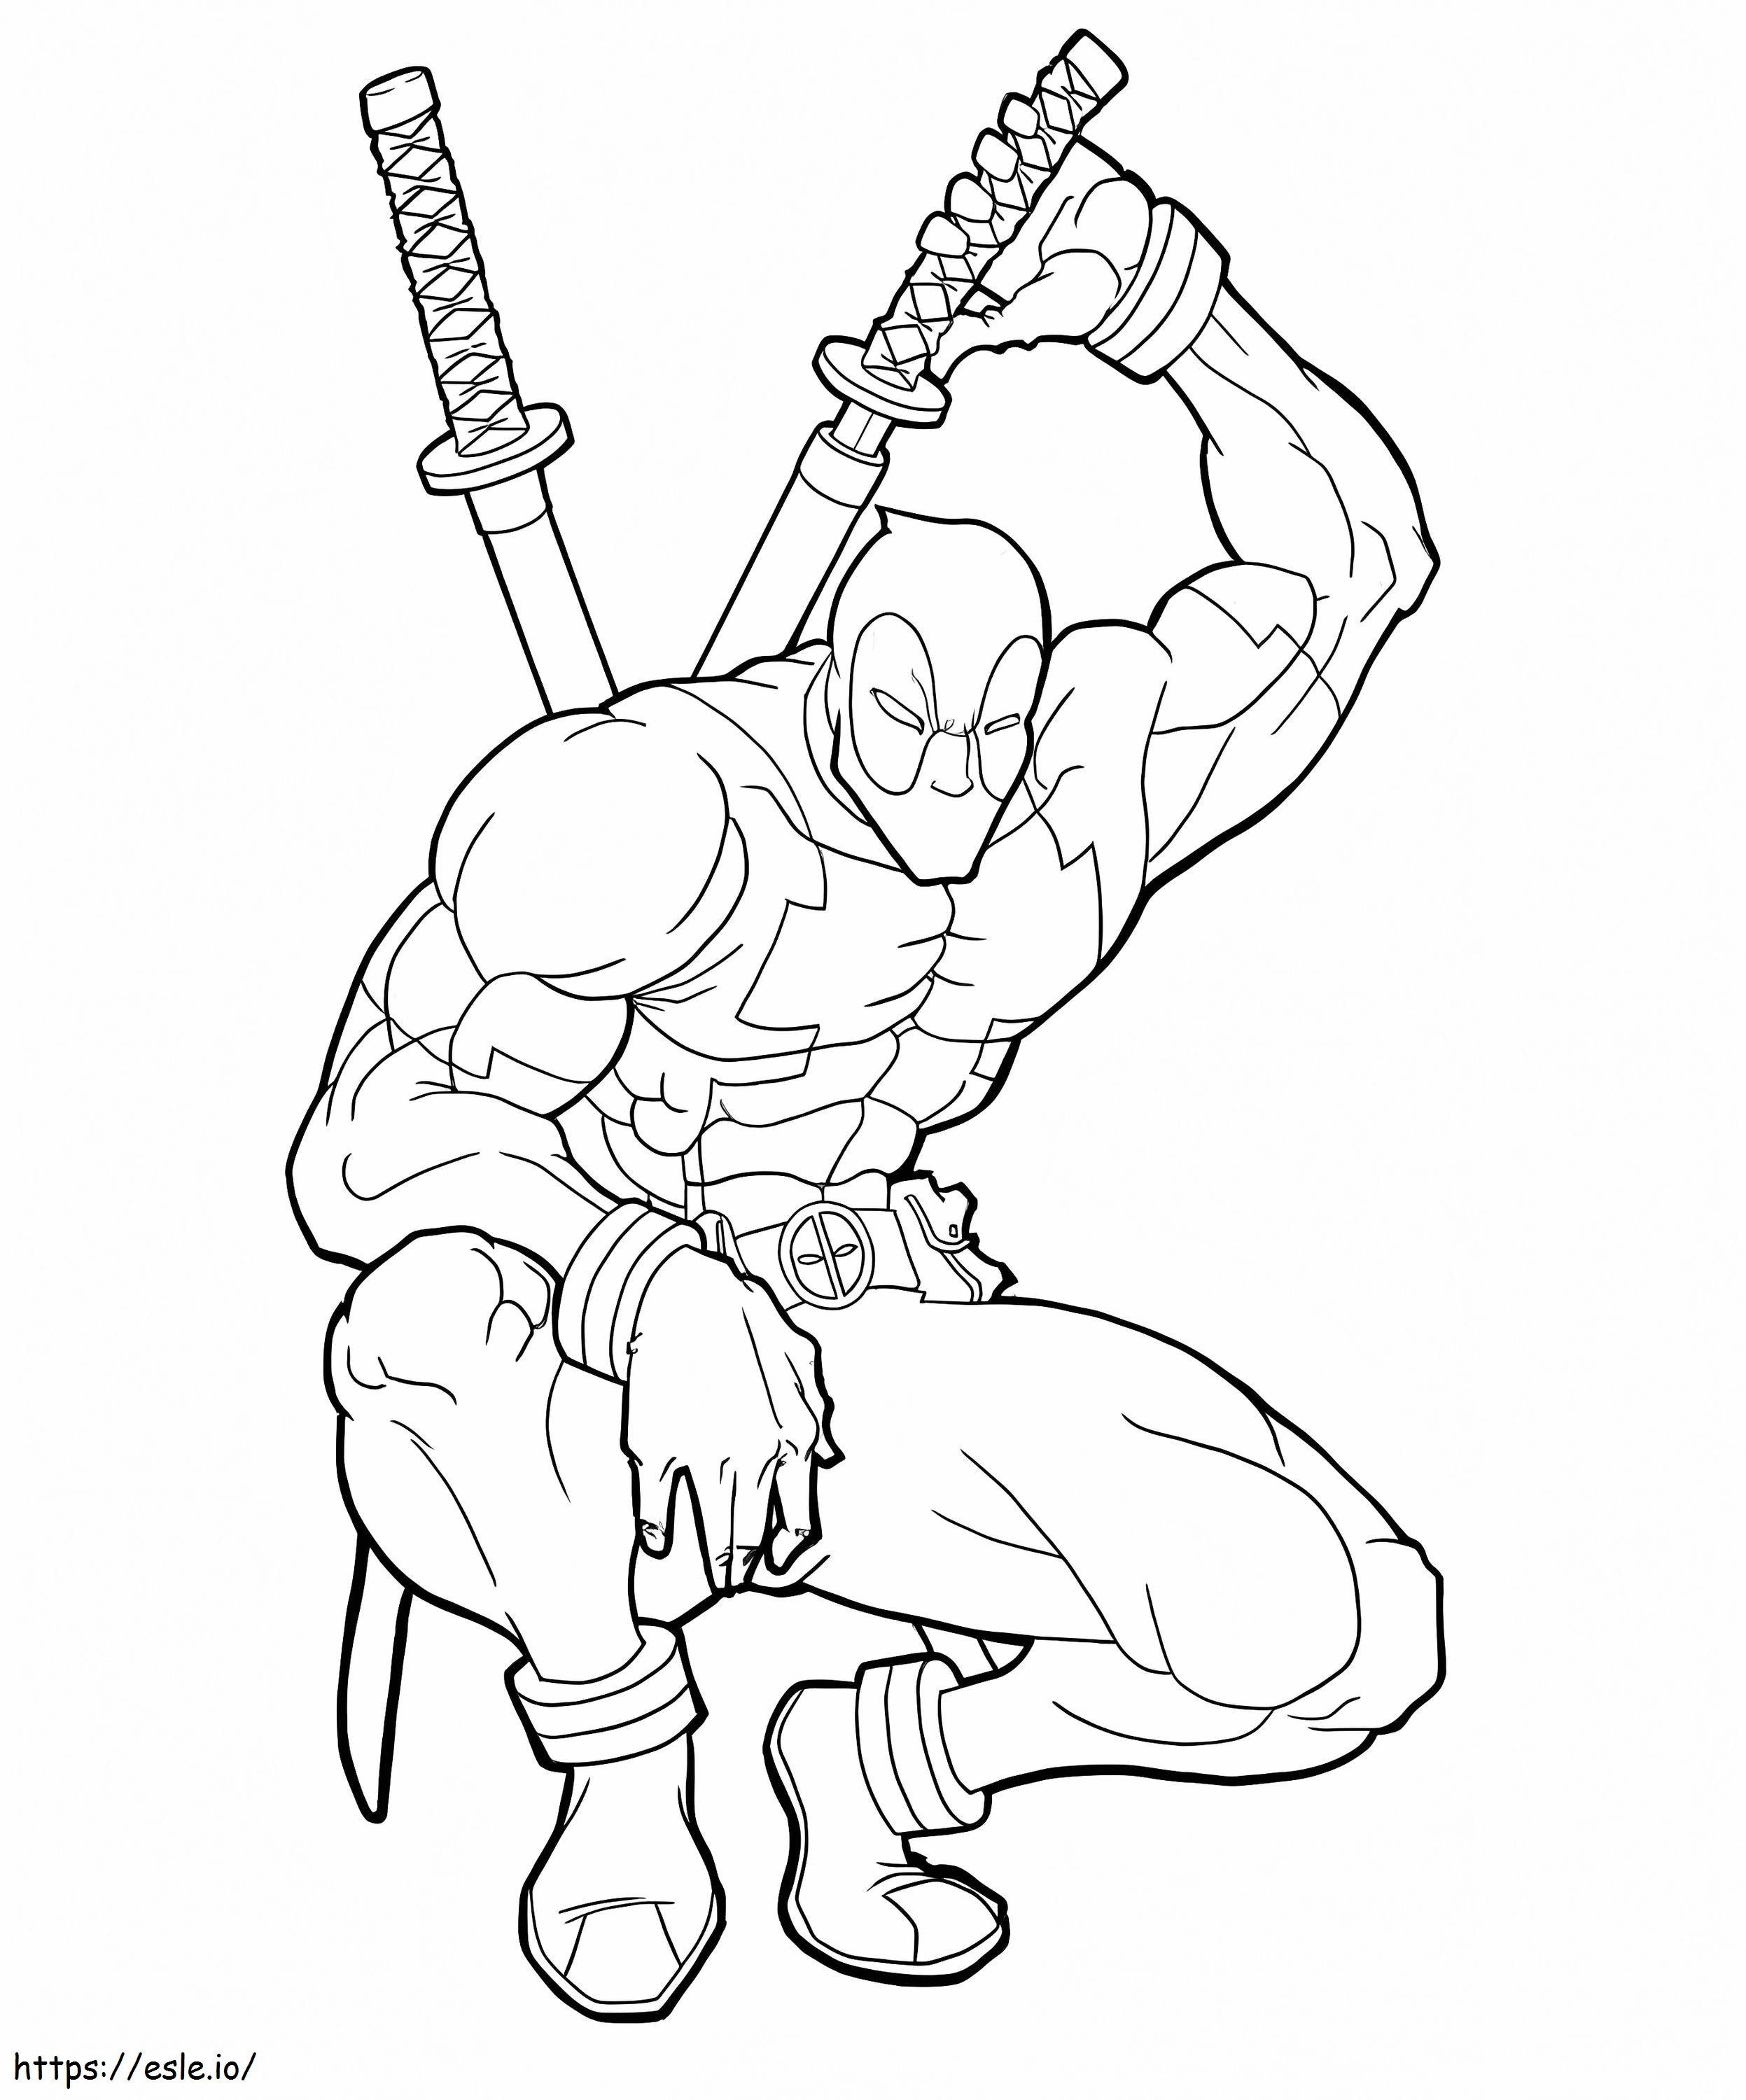 Perfect Deadpool coloring page